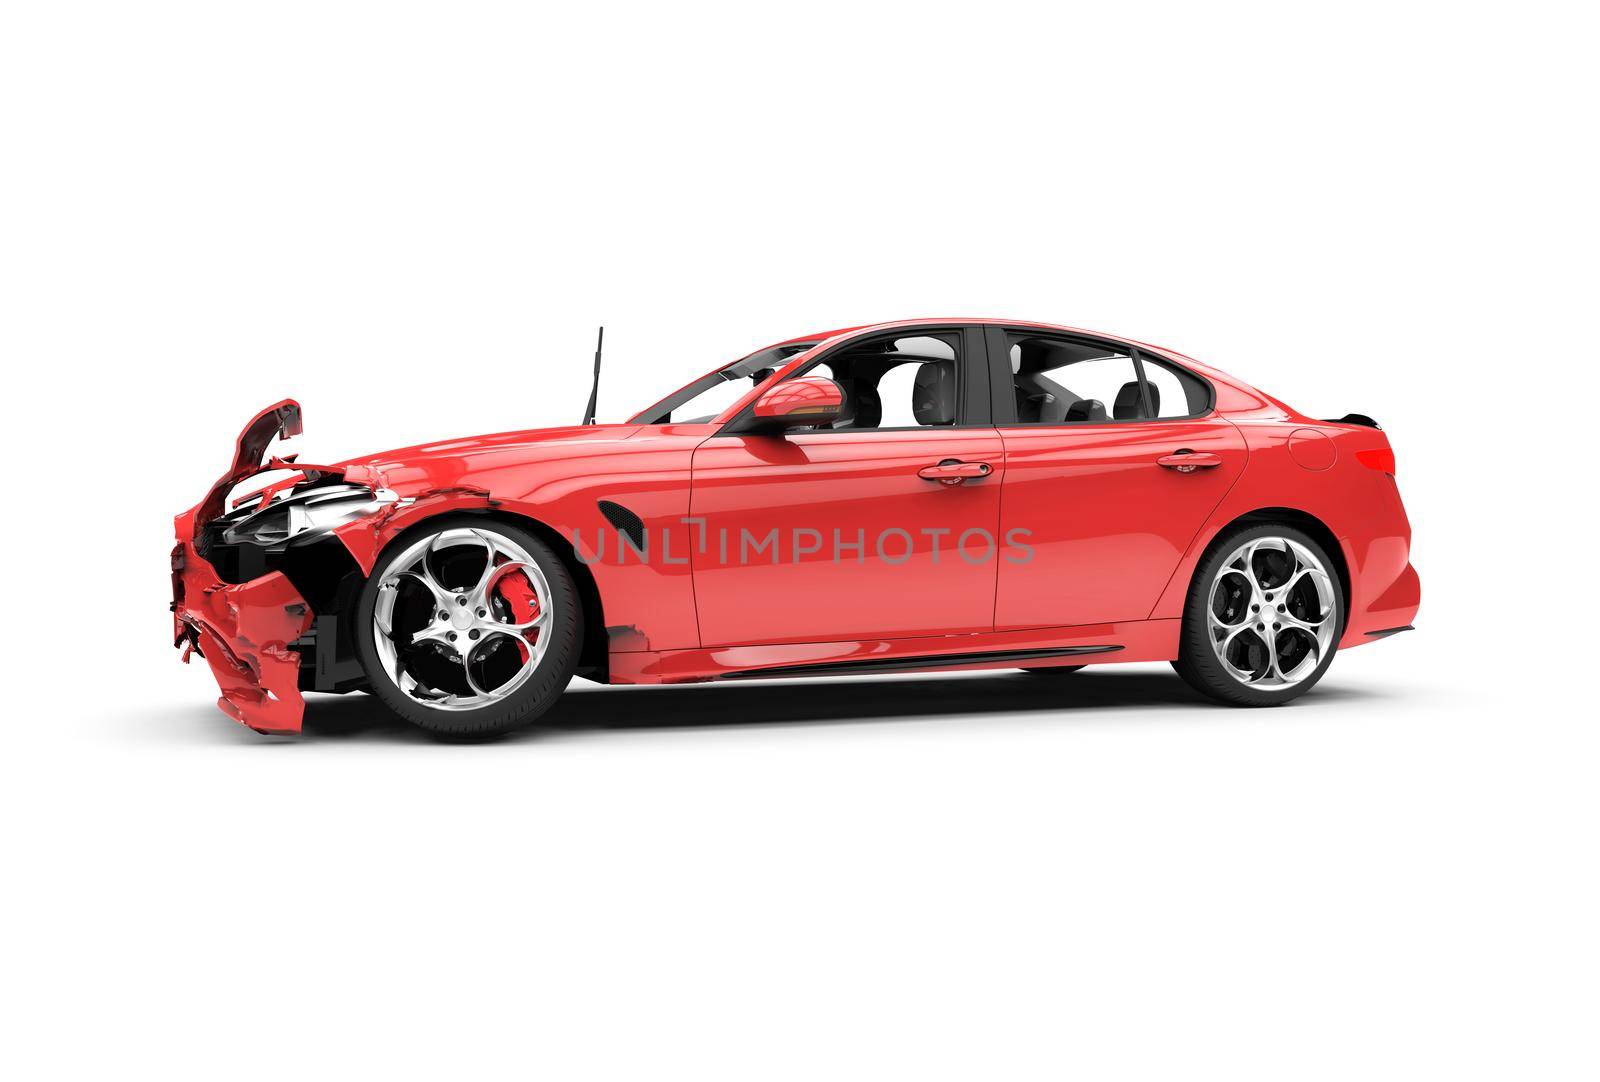 Red car crash on a white background: 3D rendering by cla78